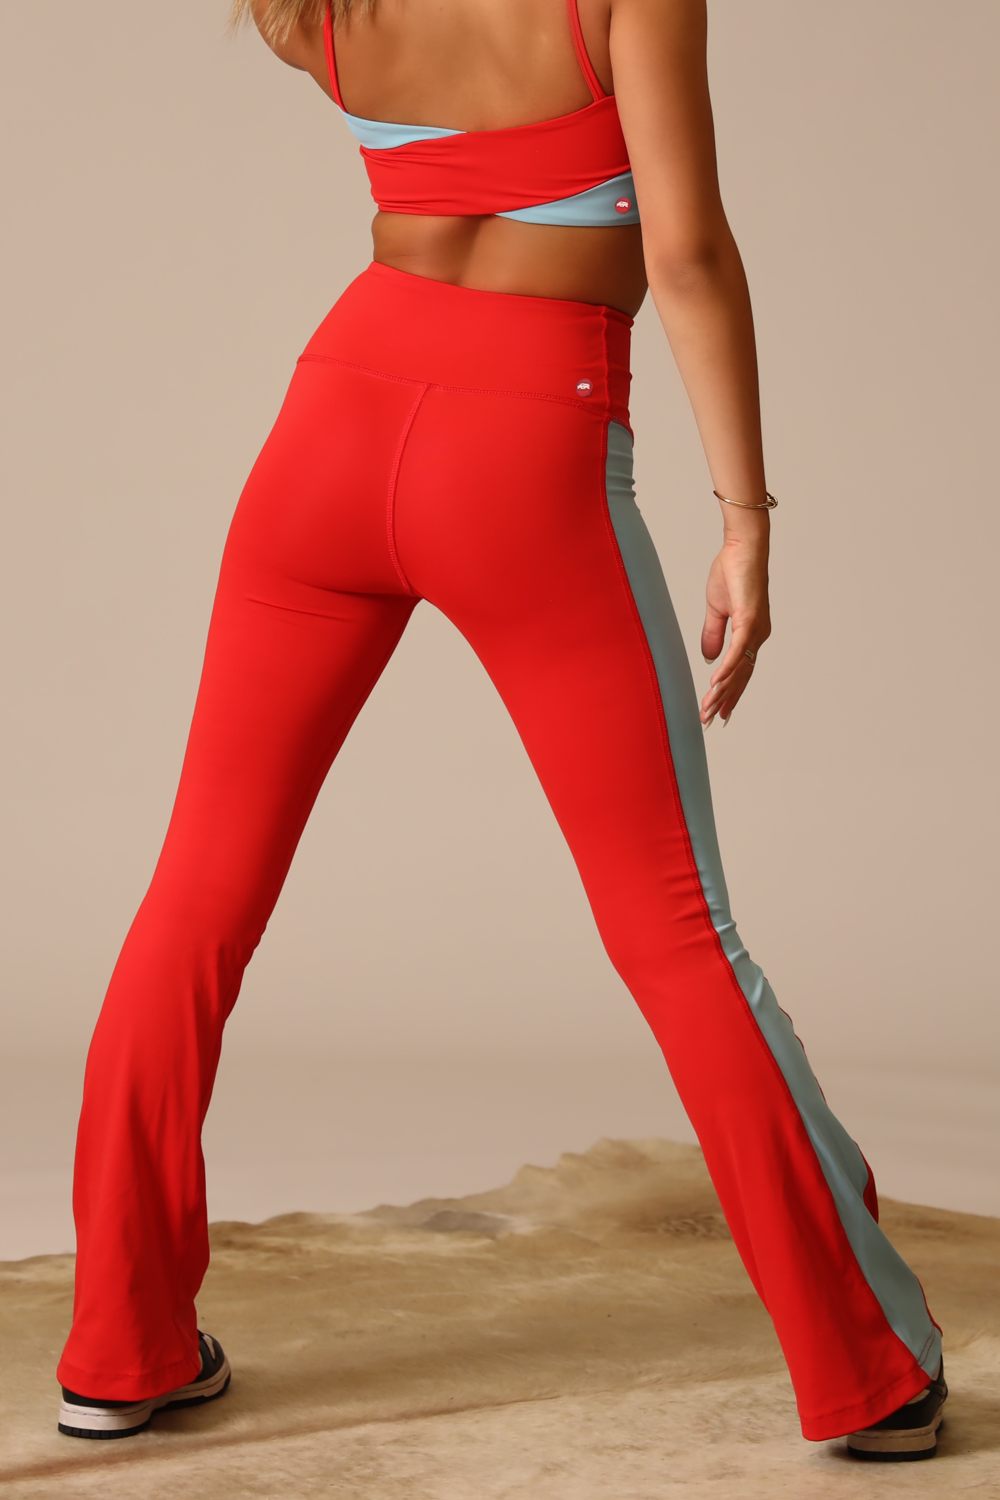 Women's Red Tiger Leggings – Fight or Quit